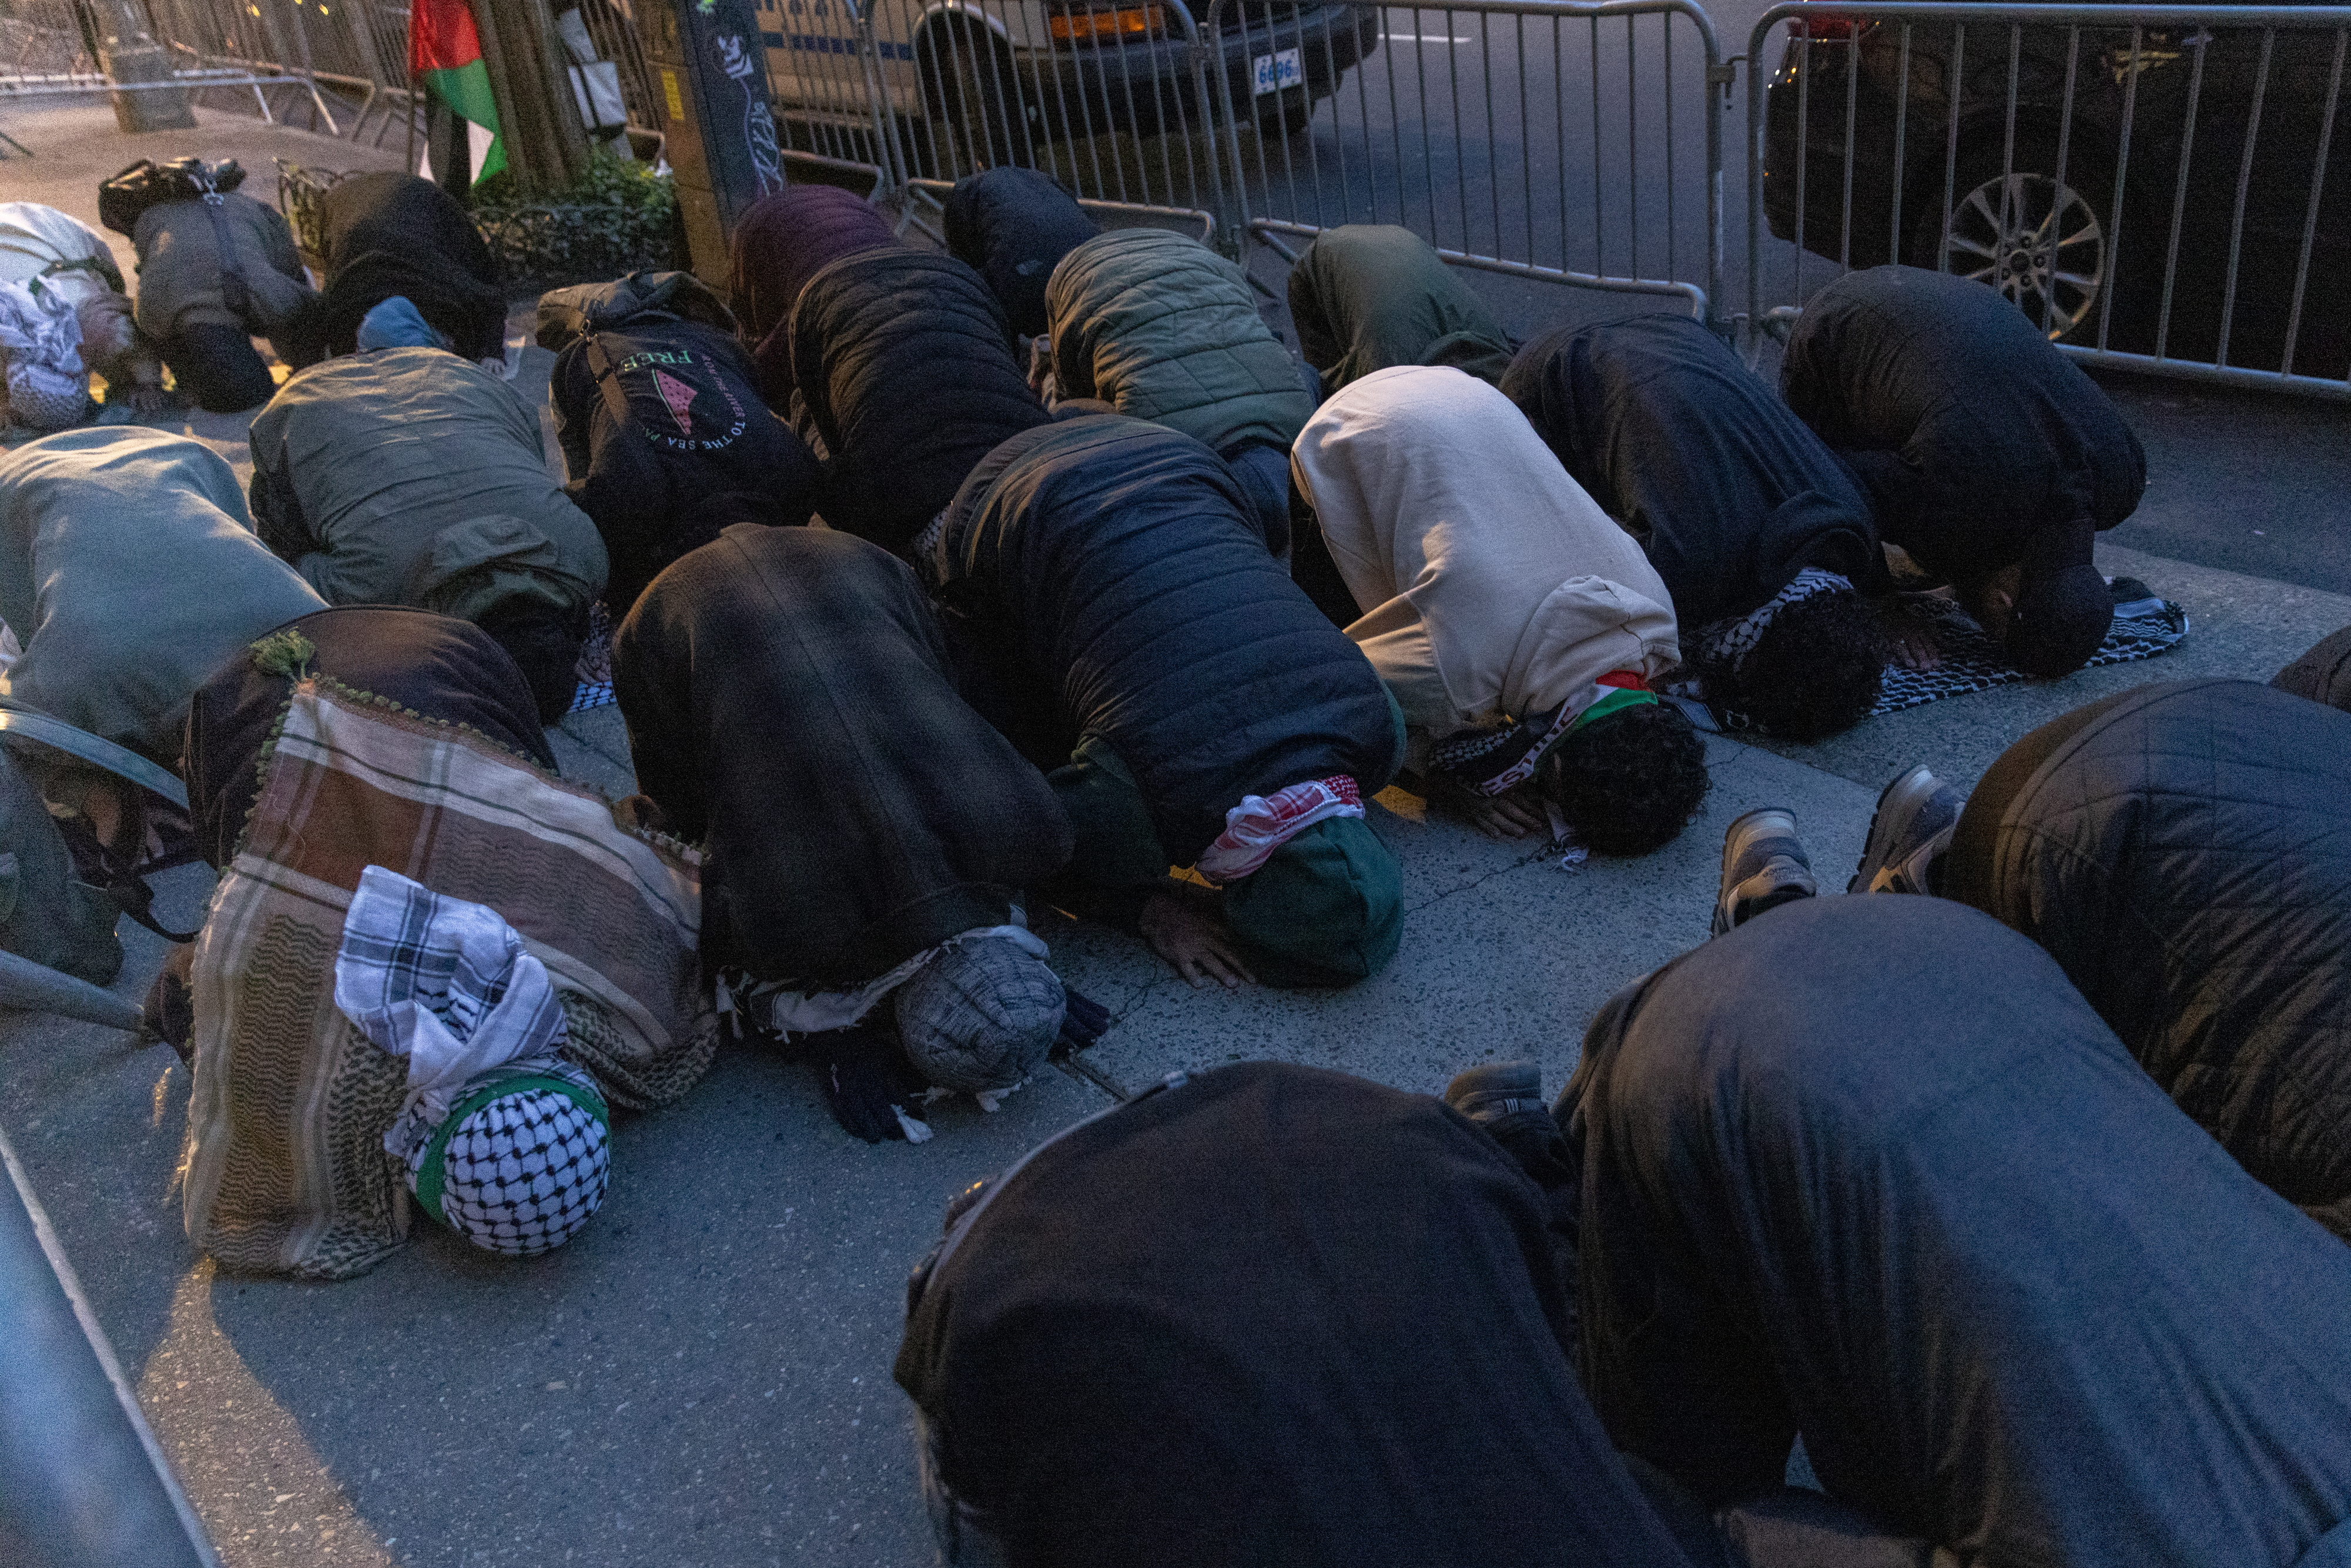 Group of people in prayer outside, kneeling on the ground